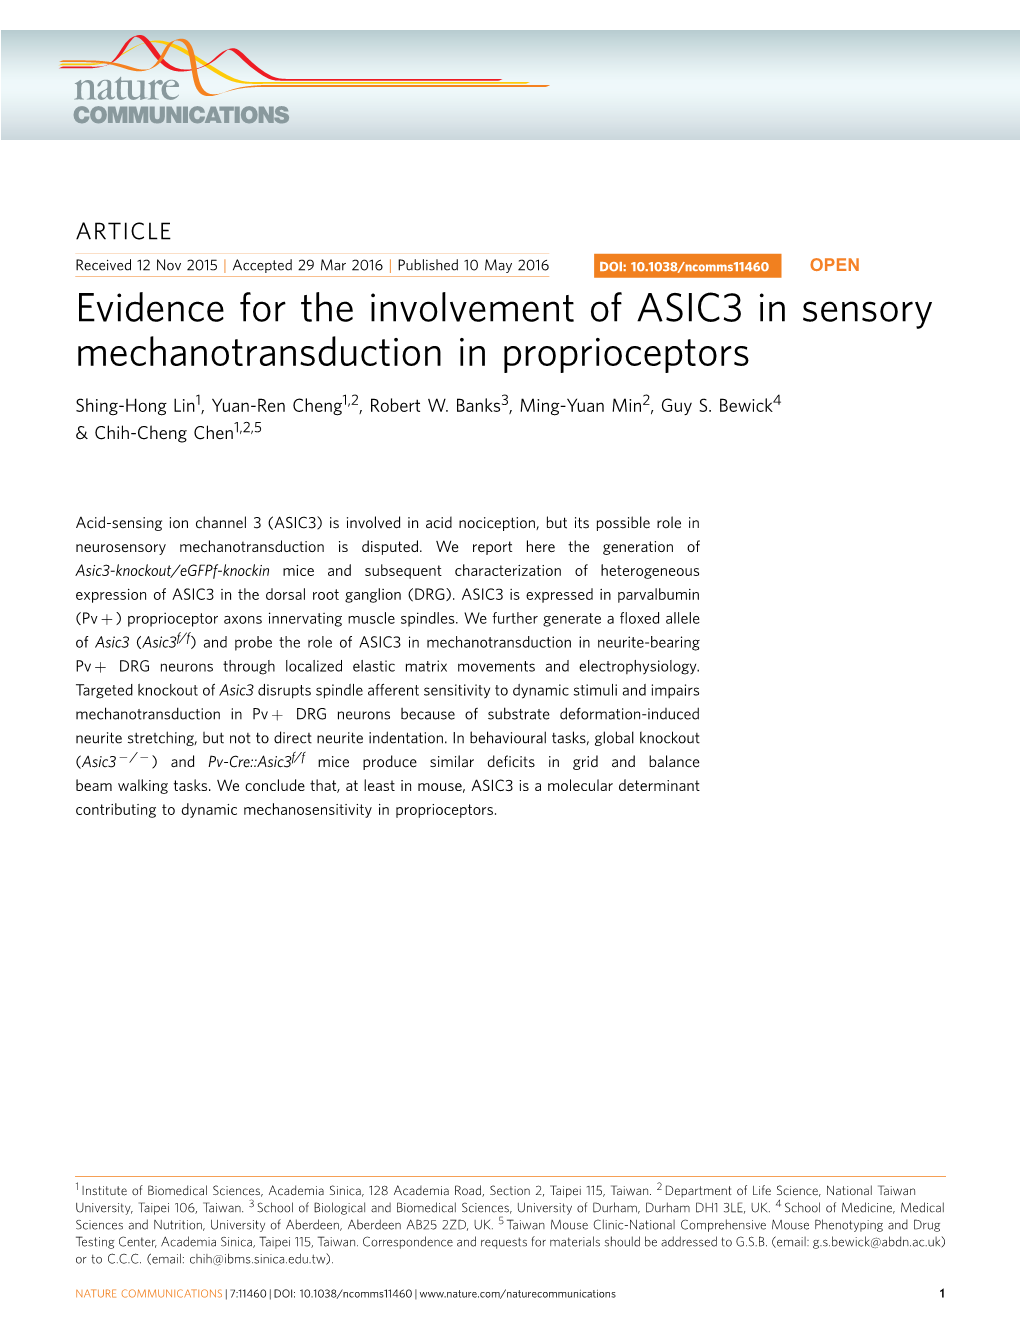 Evidence for the Involvement of ASIC3 in Sensory Mechanotransduction in Proprioceptors